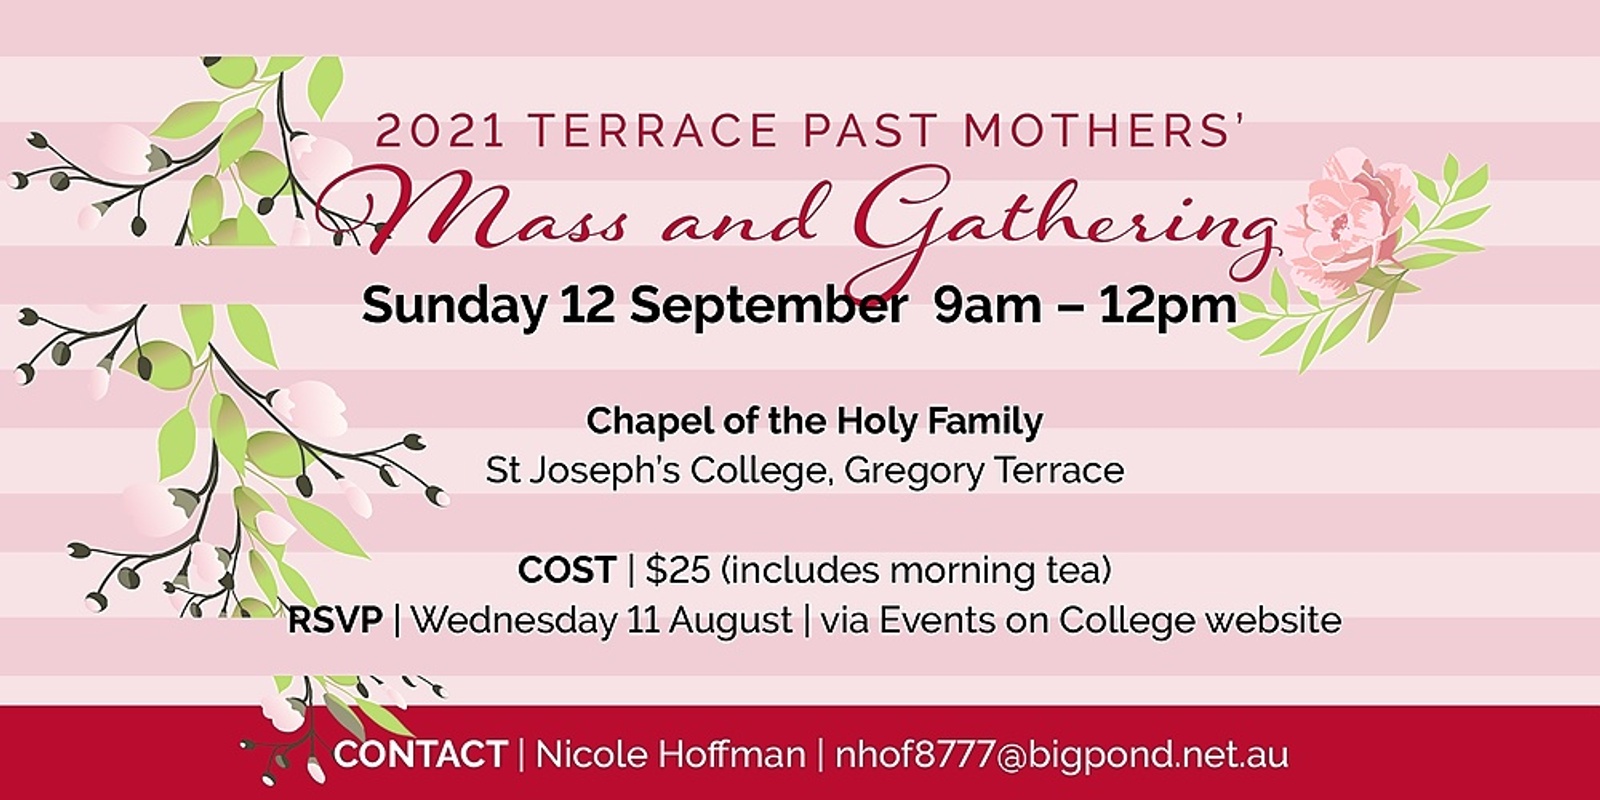 Banner image for 2021 Terrace Past Mothers’ Mass and Gathering